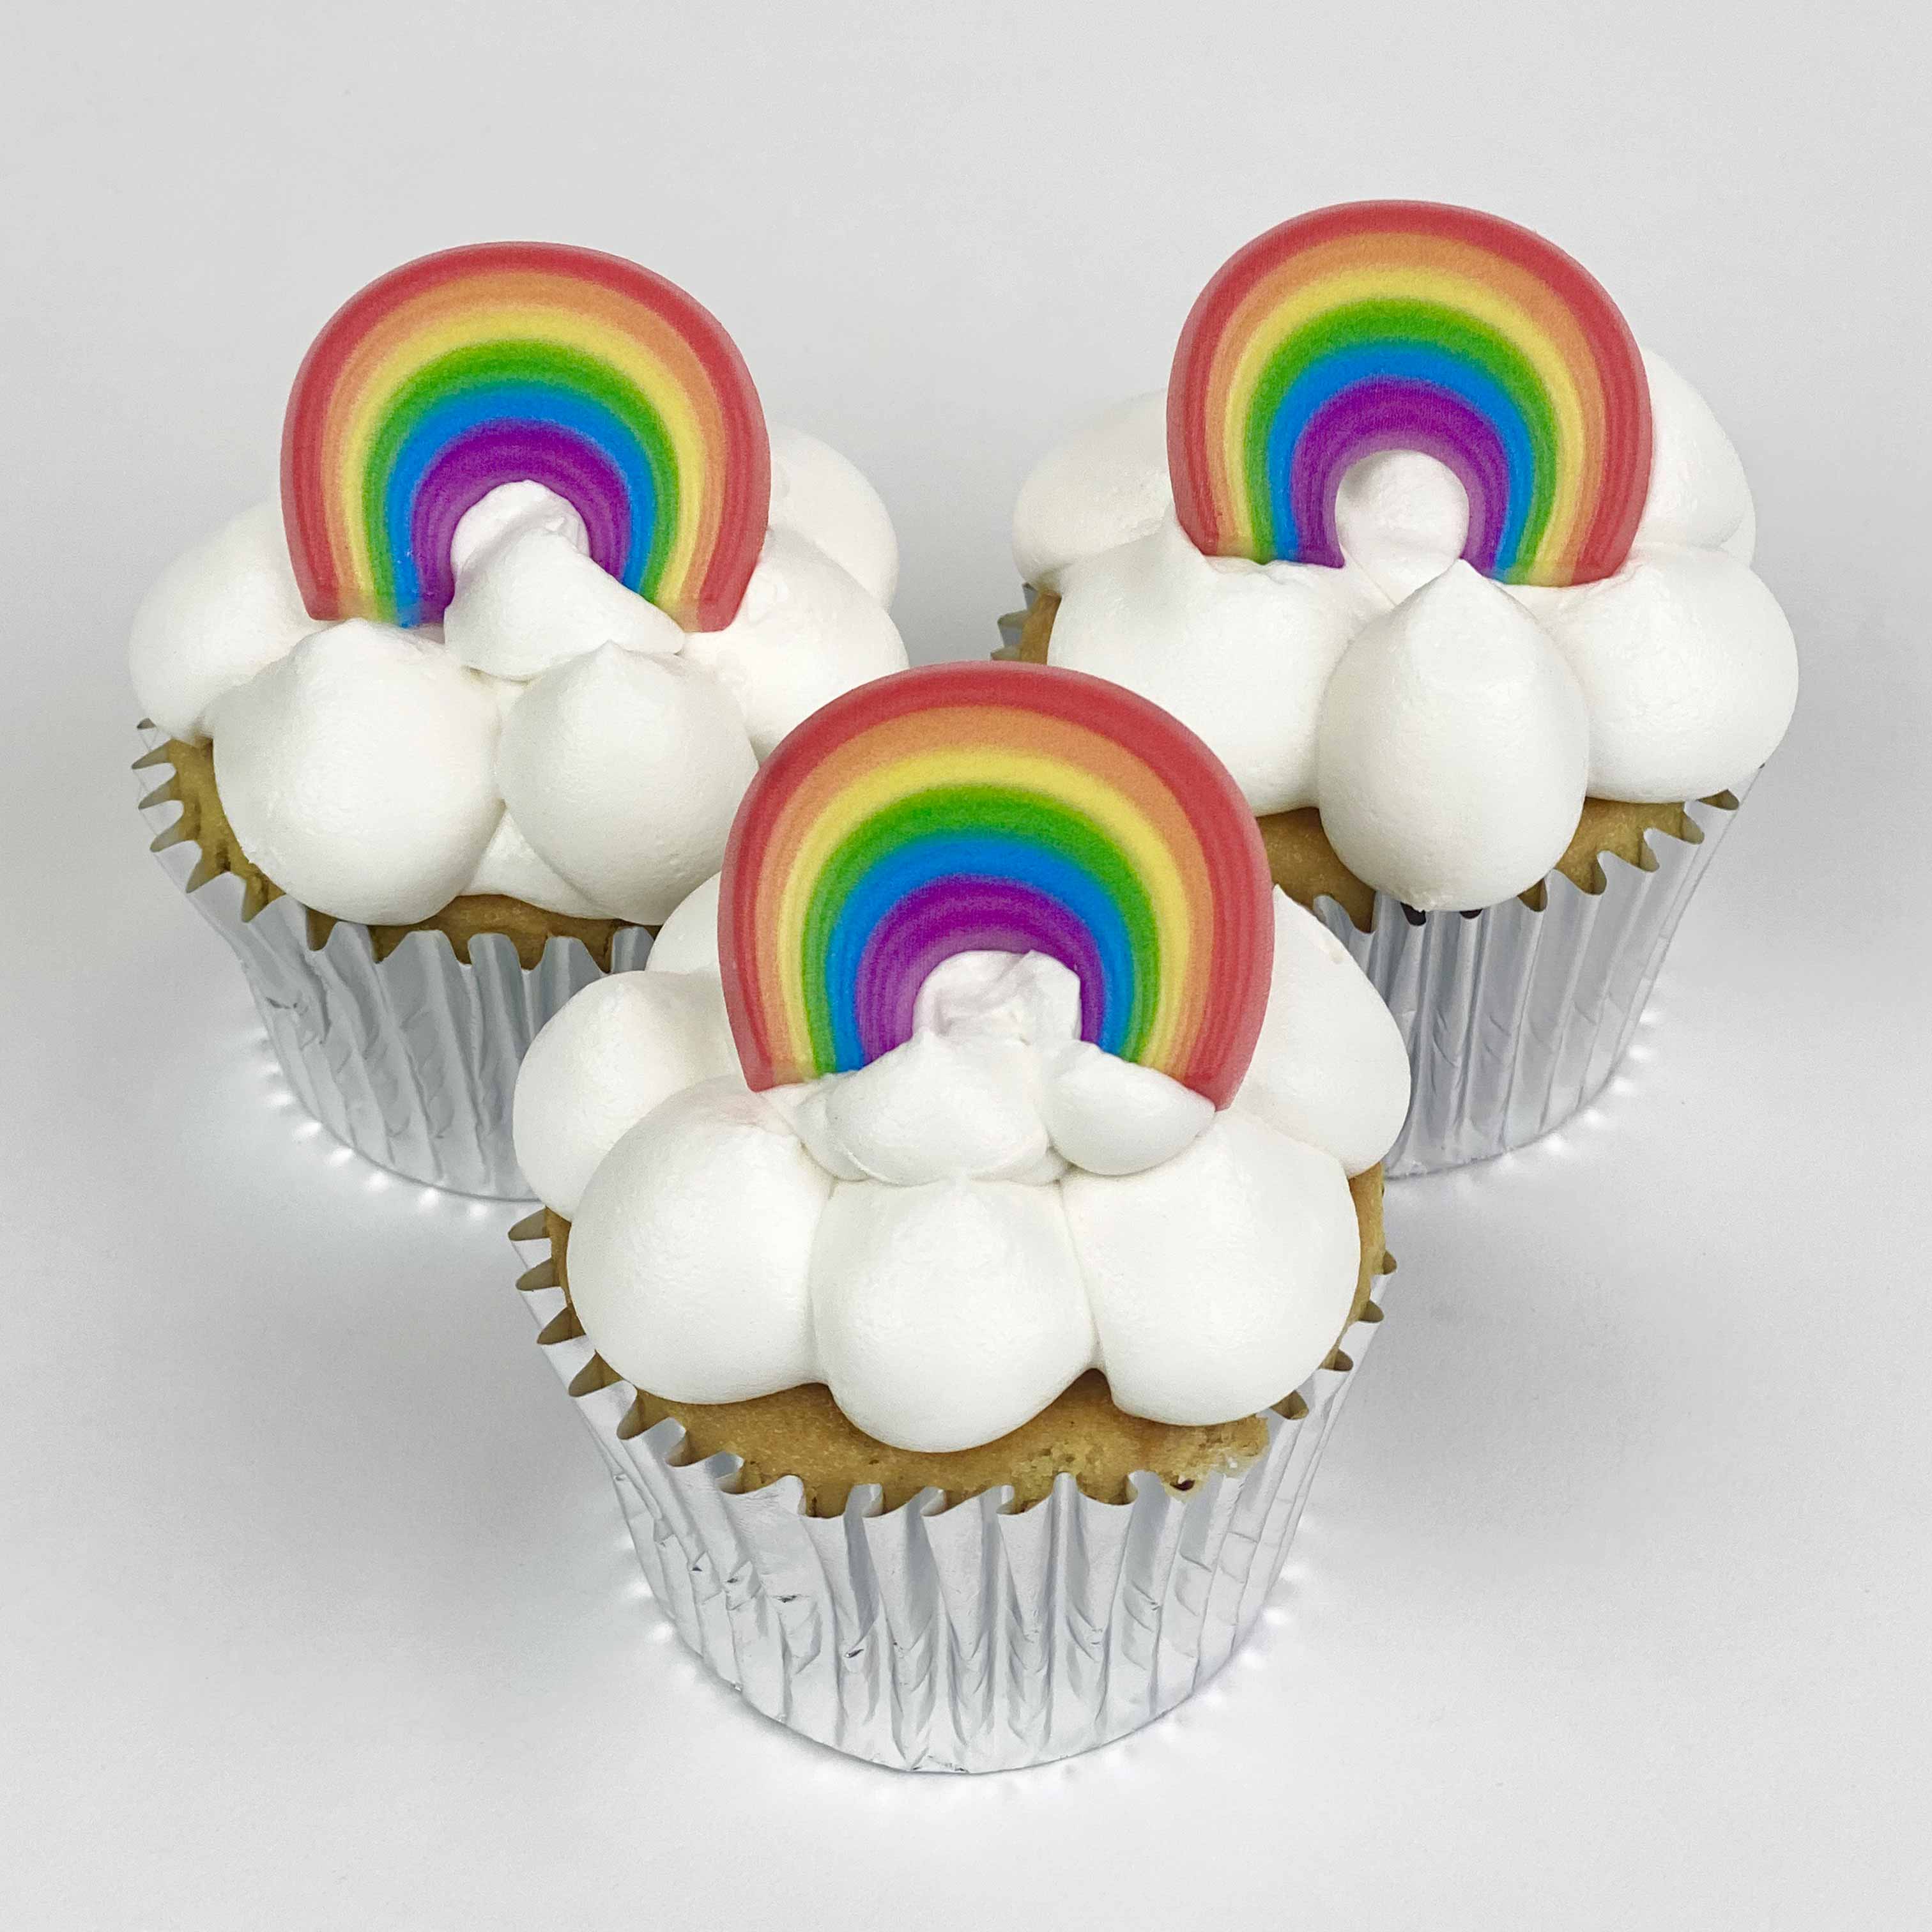 Rainbow and Clouds Cupcakes